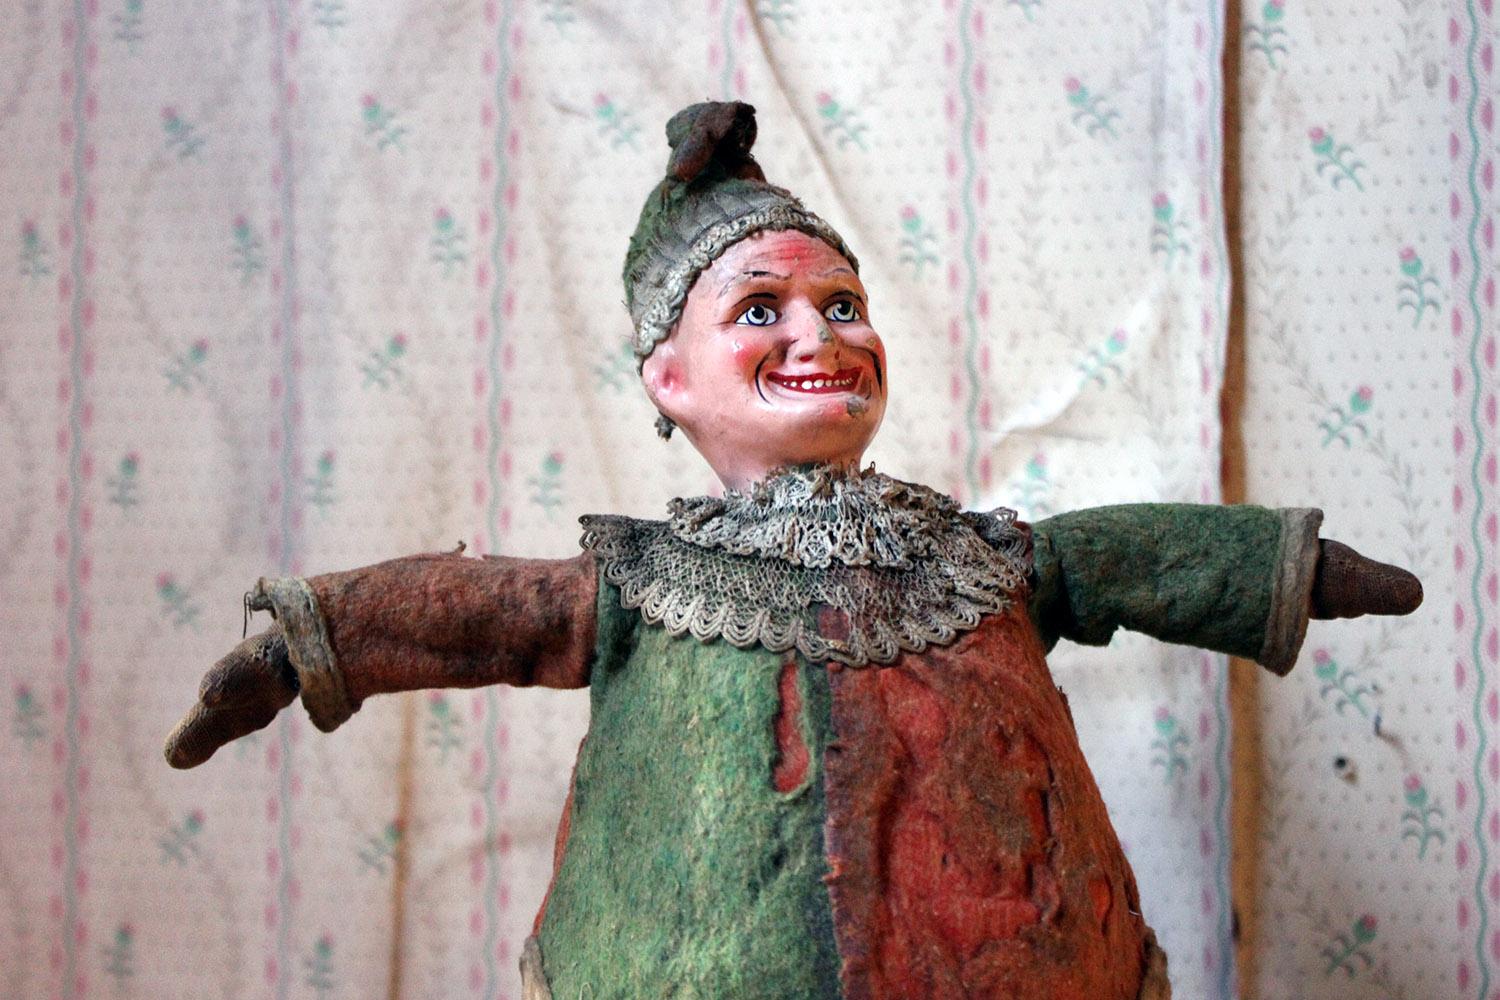 Italian Early 20th Century Mr Punch Roly Poly Toy, circa 1915-1925